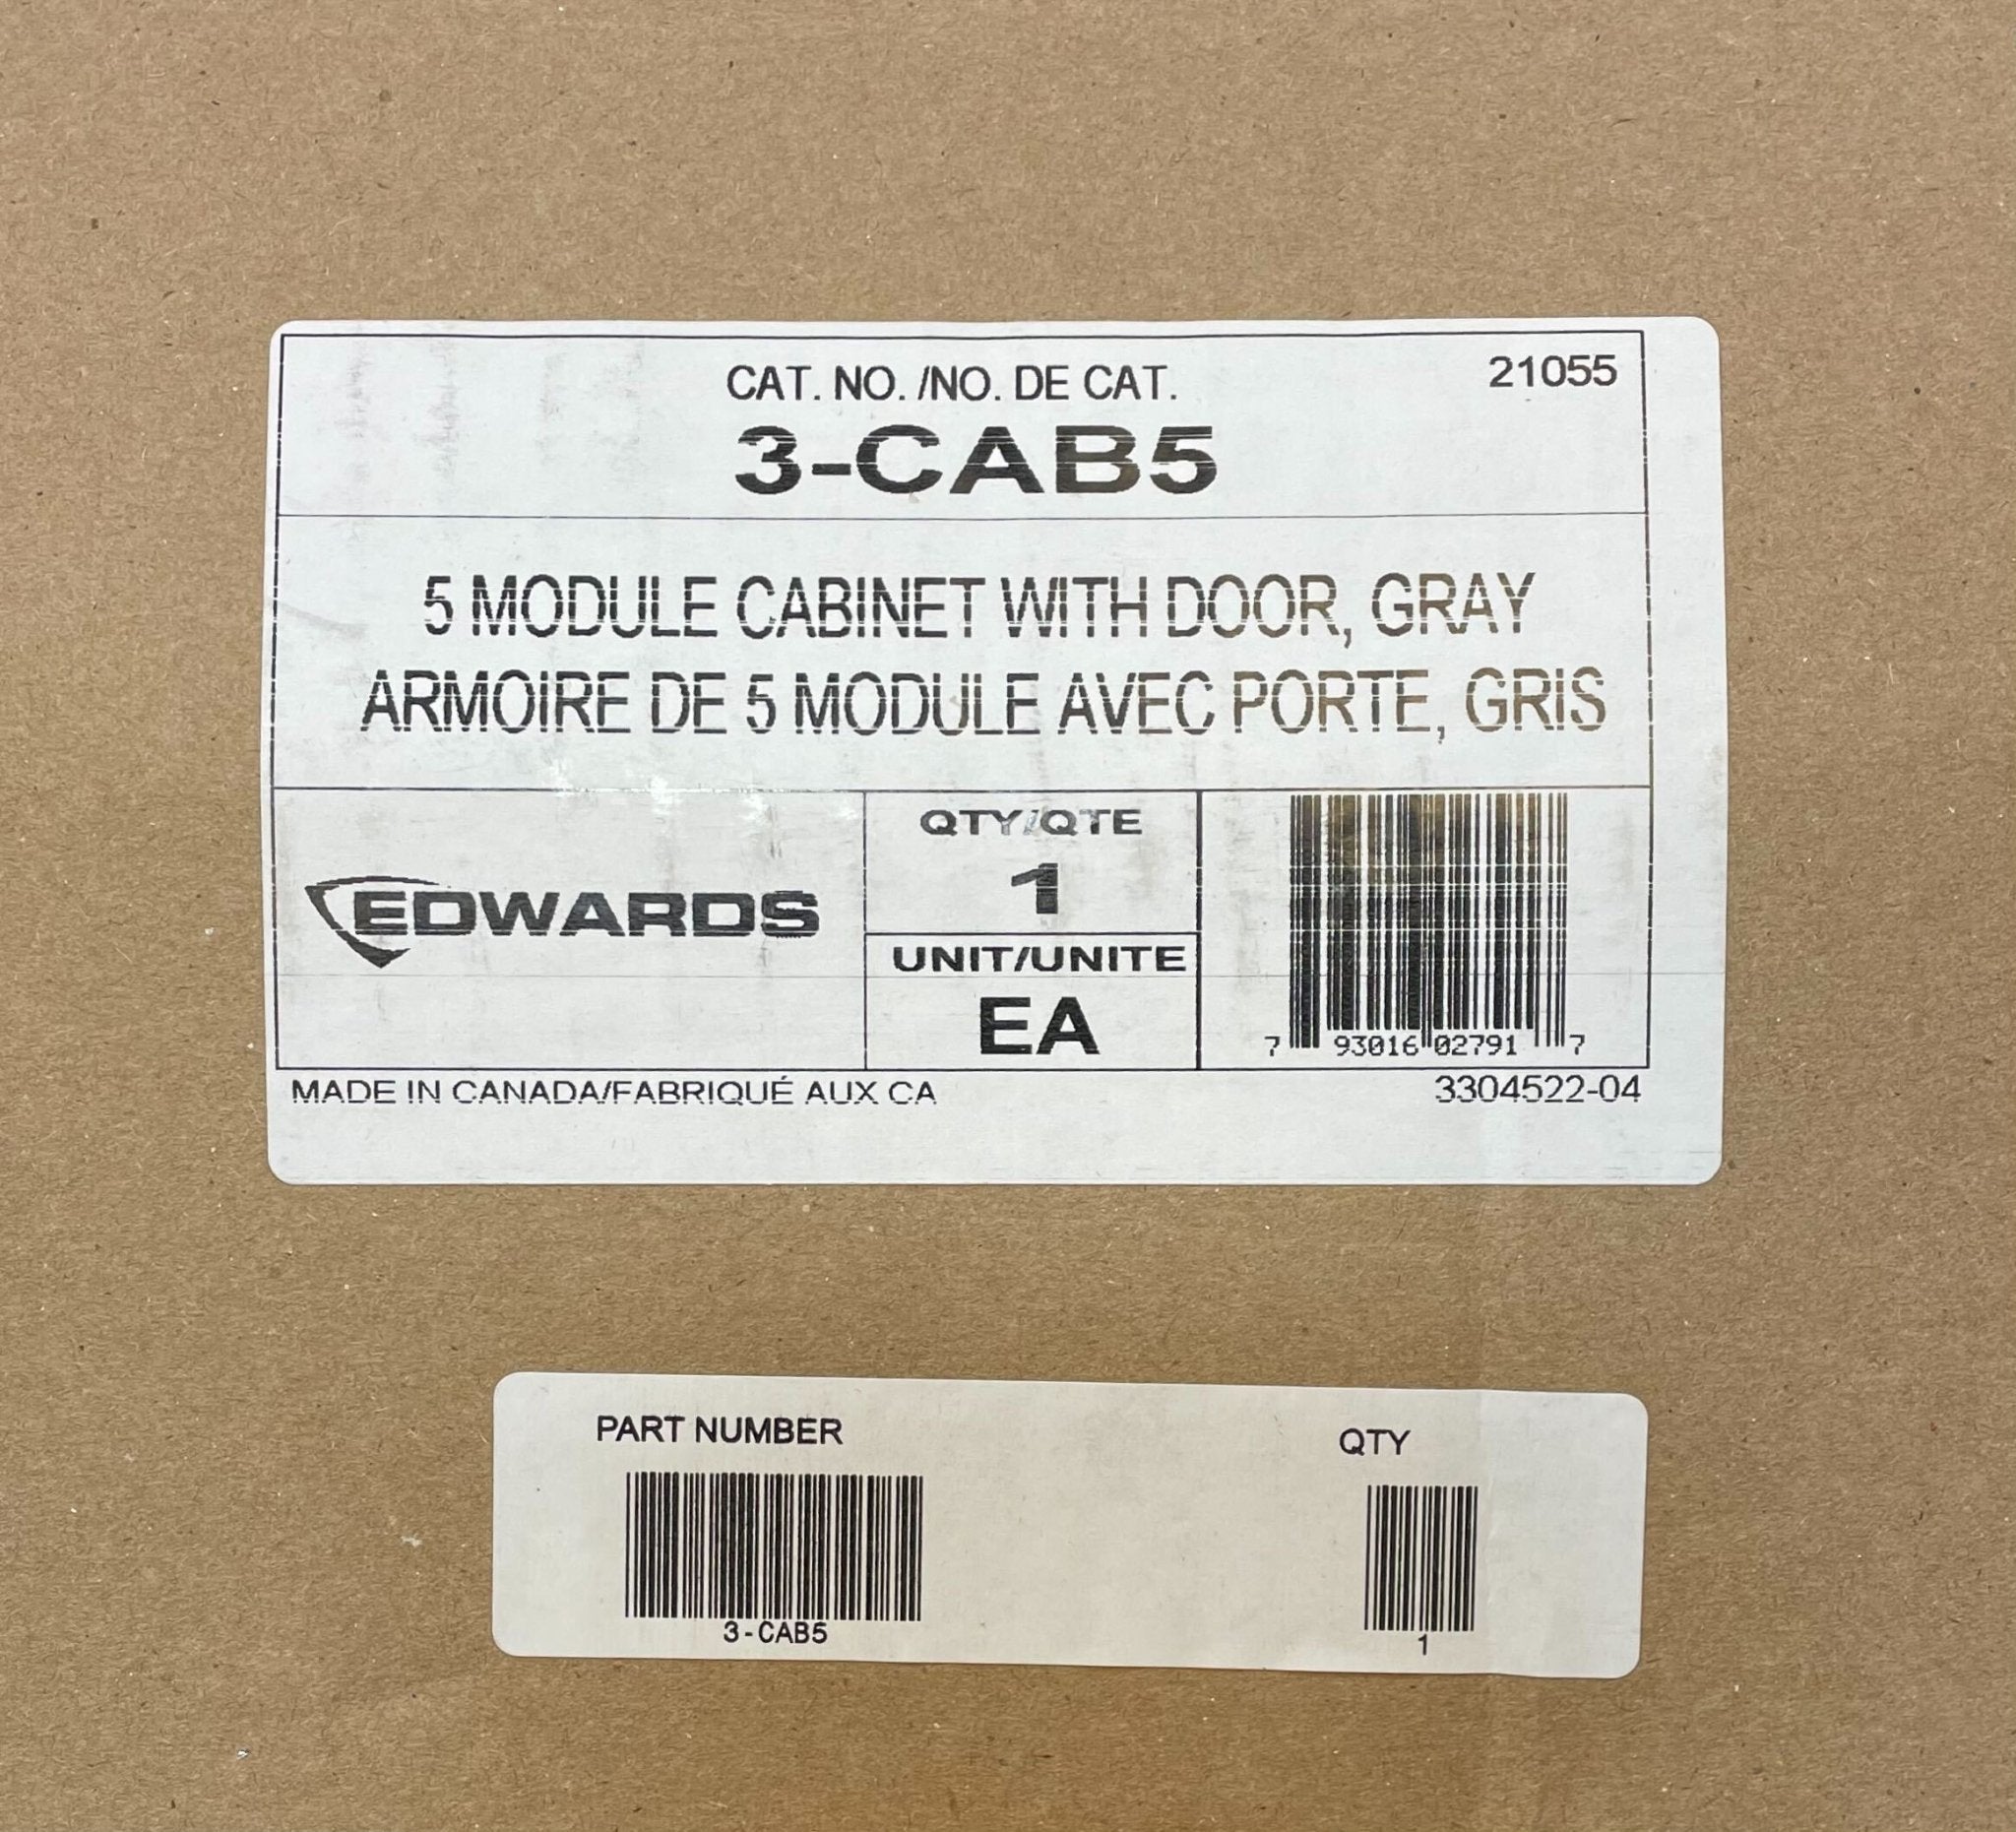 Edwards 3-CAB5 - The Fire Alarm Supplier